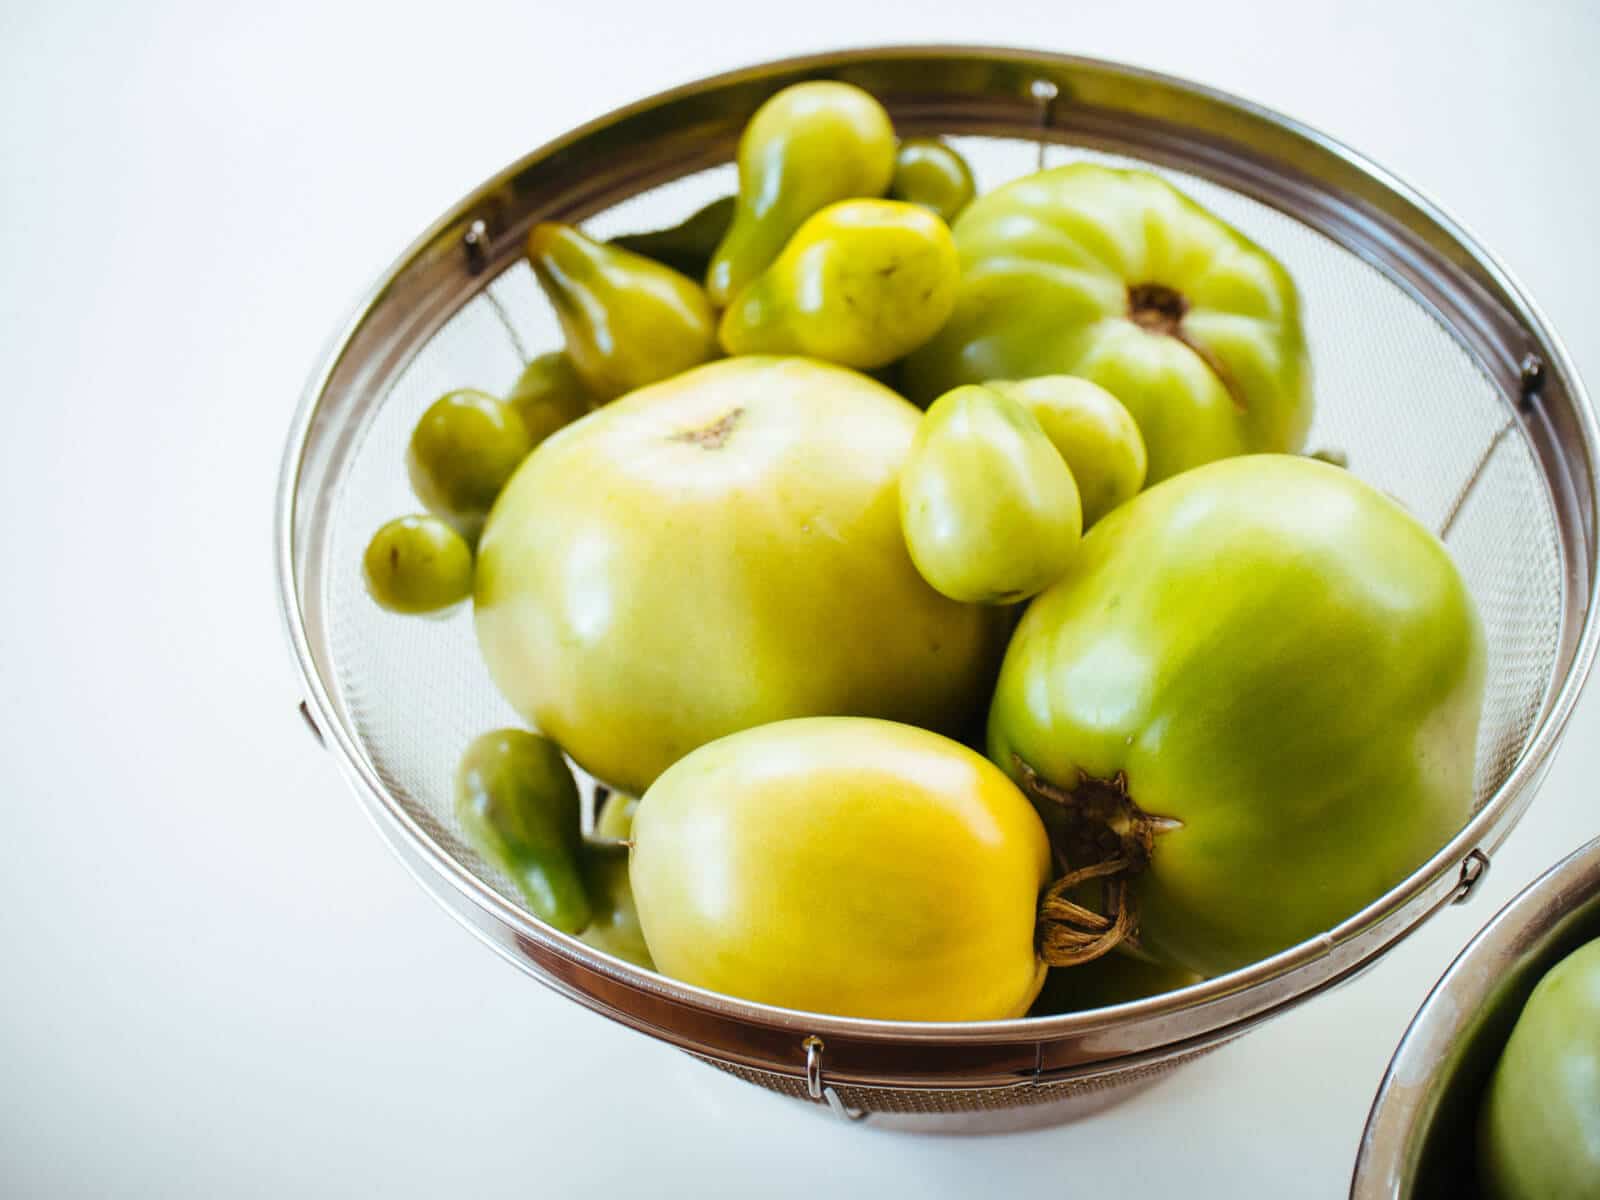 Green tomatoes ready for preserving